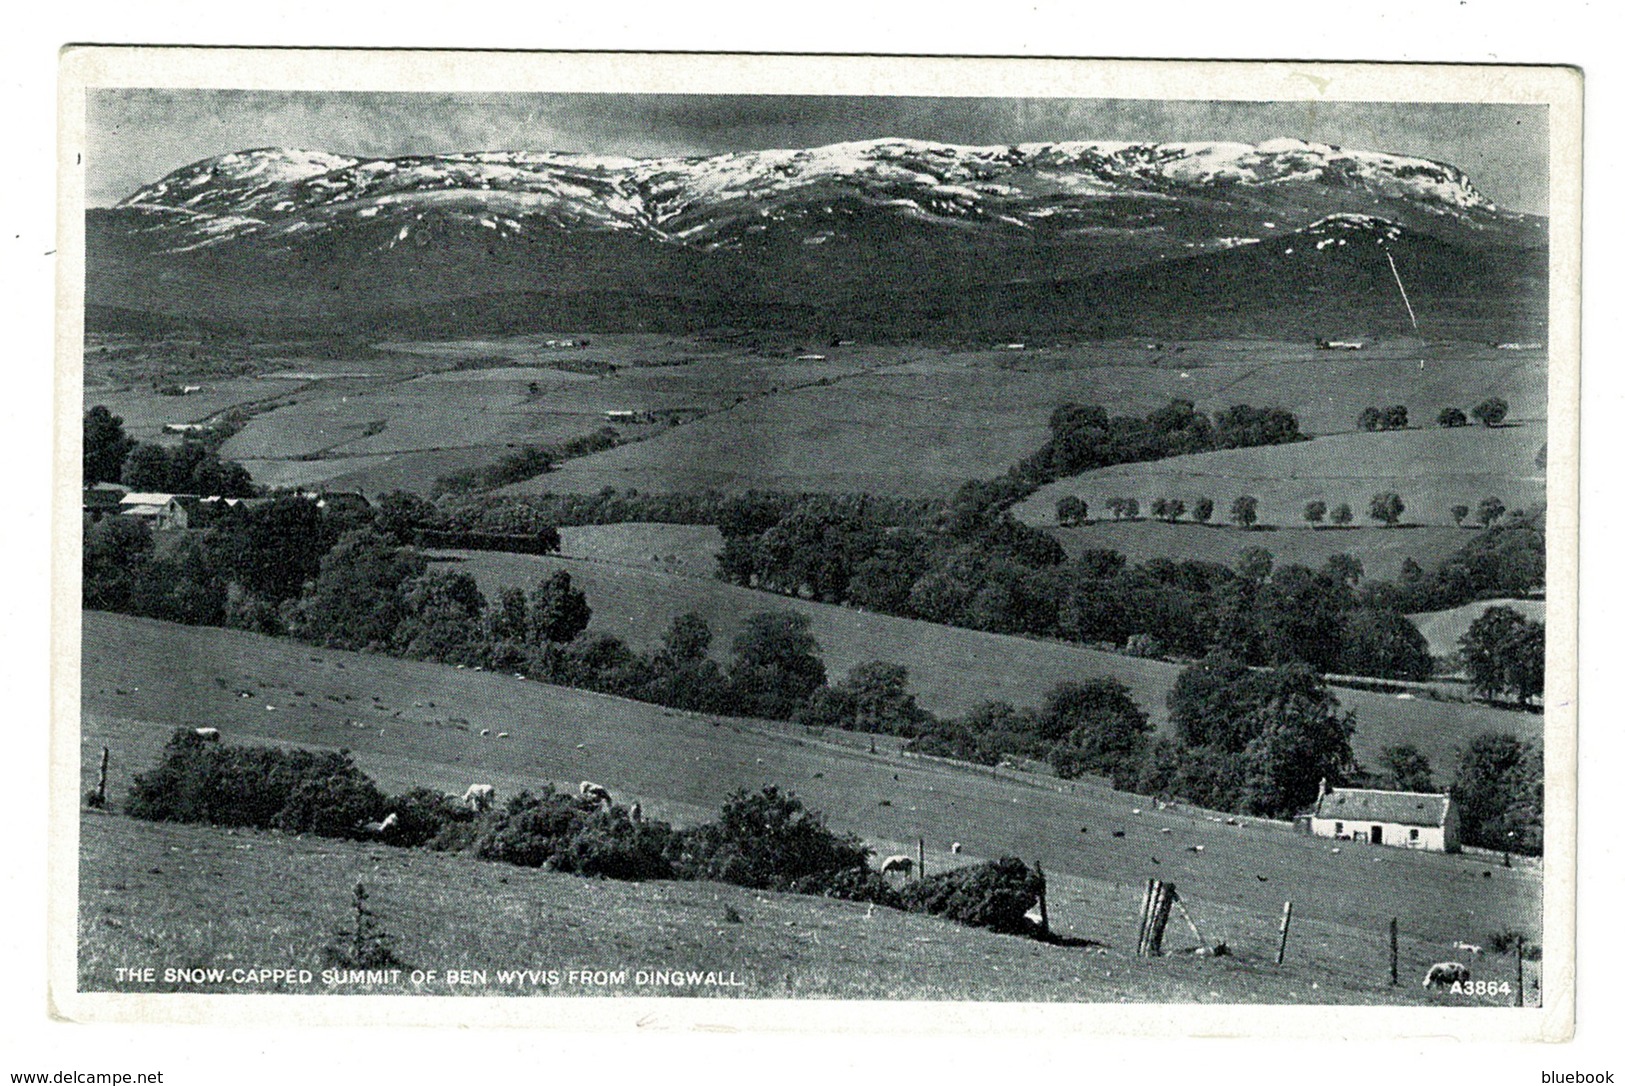 Ref 1380 - Early Postcard - Snow Capped Summit Of Ben Wyvis From Dingwell - Scotland - Ross & Cromarty